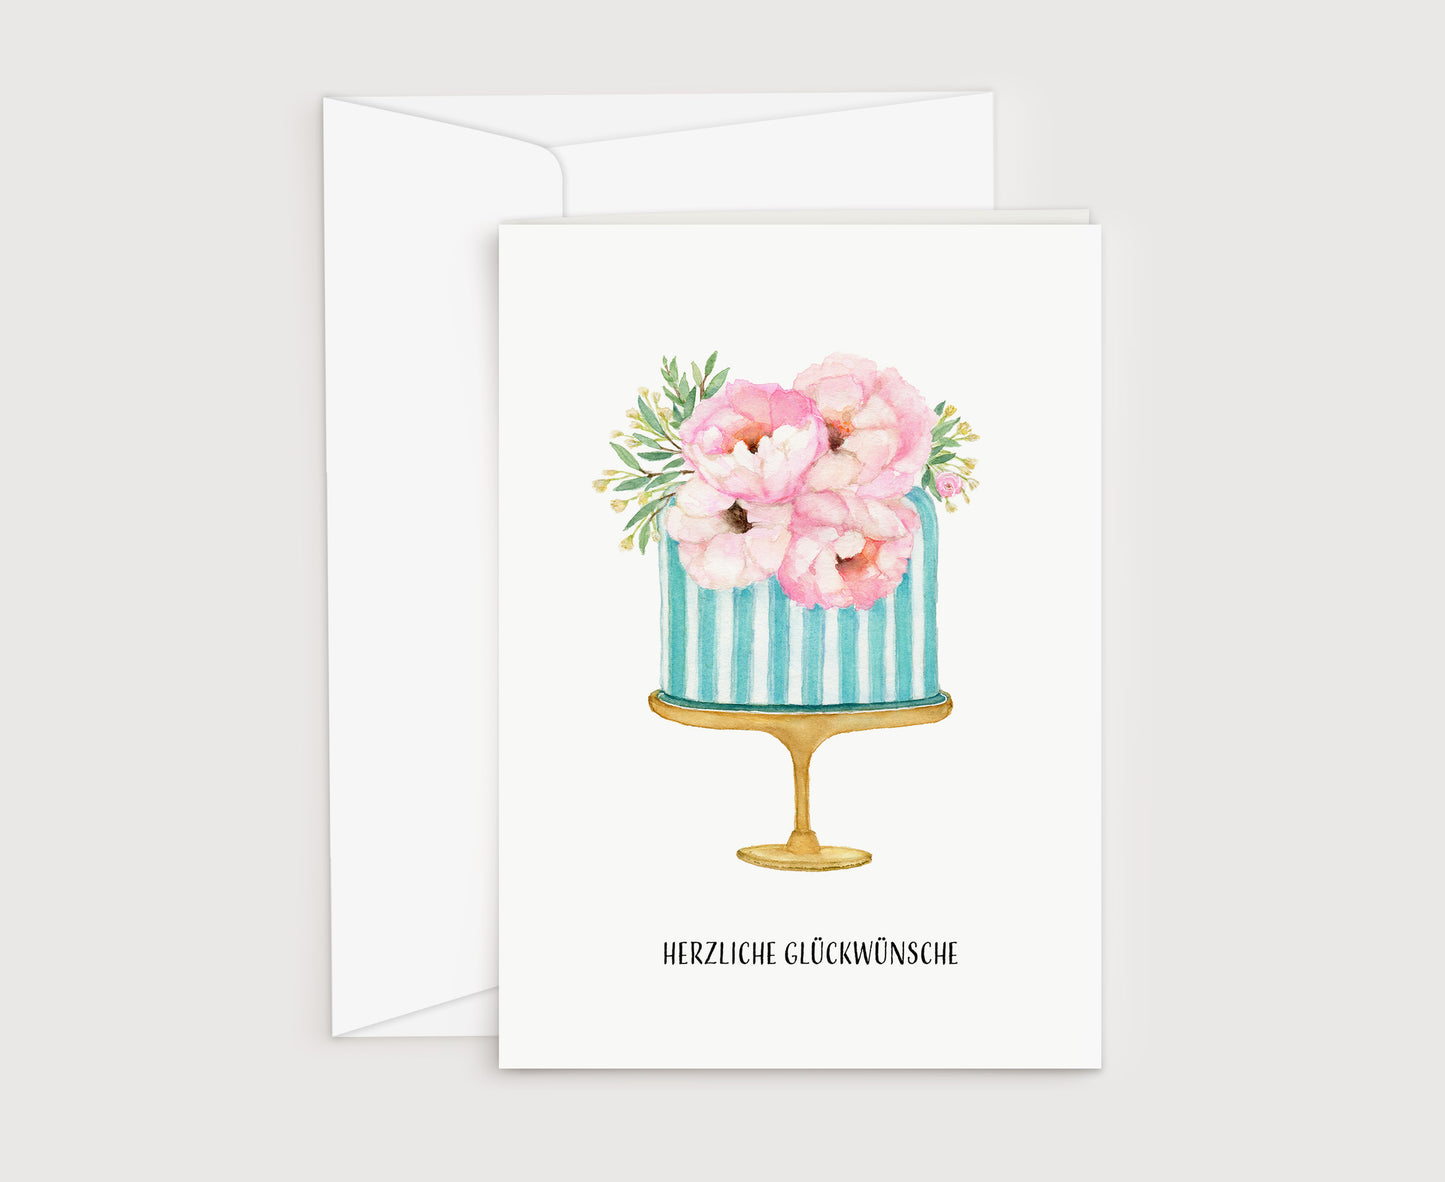 a card with a blue and white striped cake with pink flowers